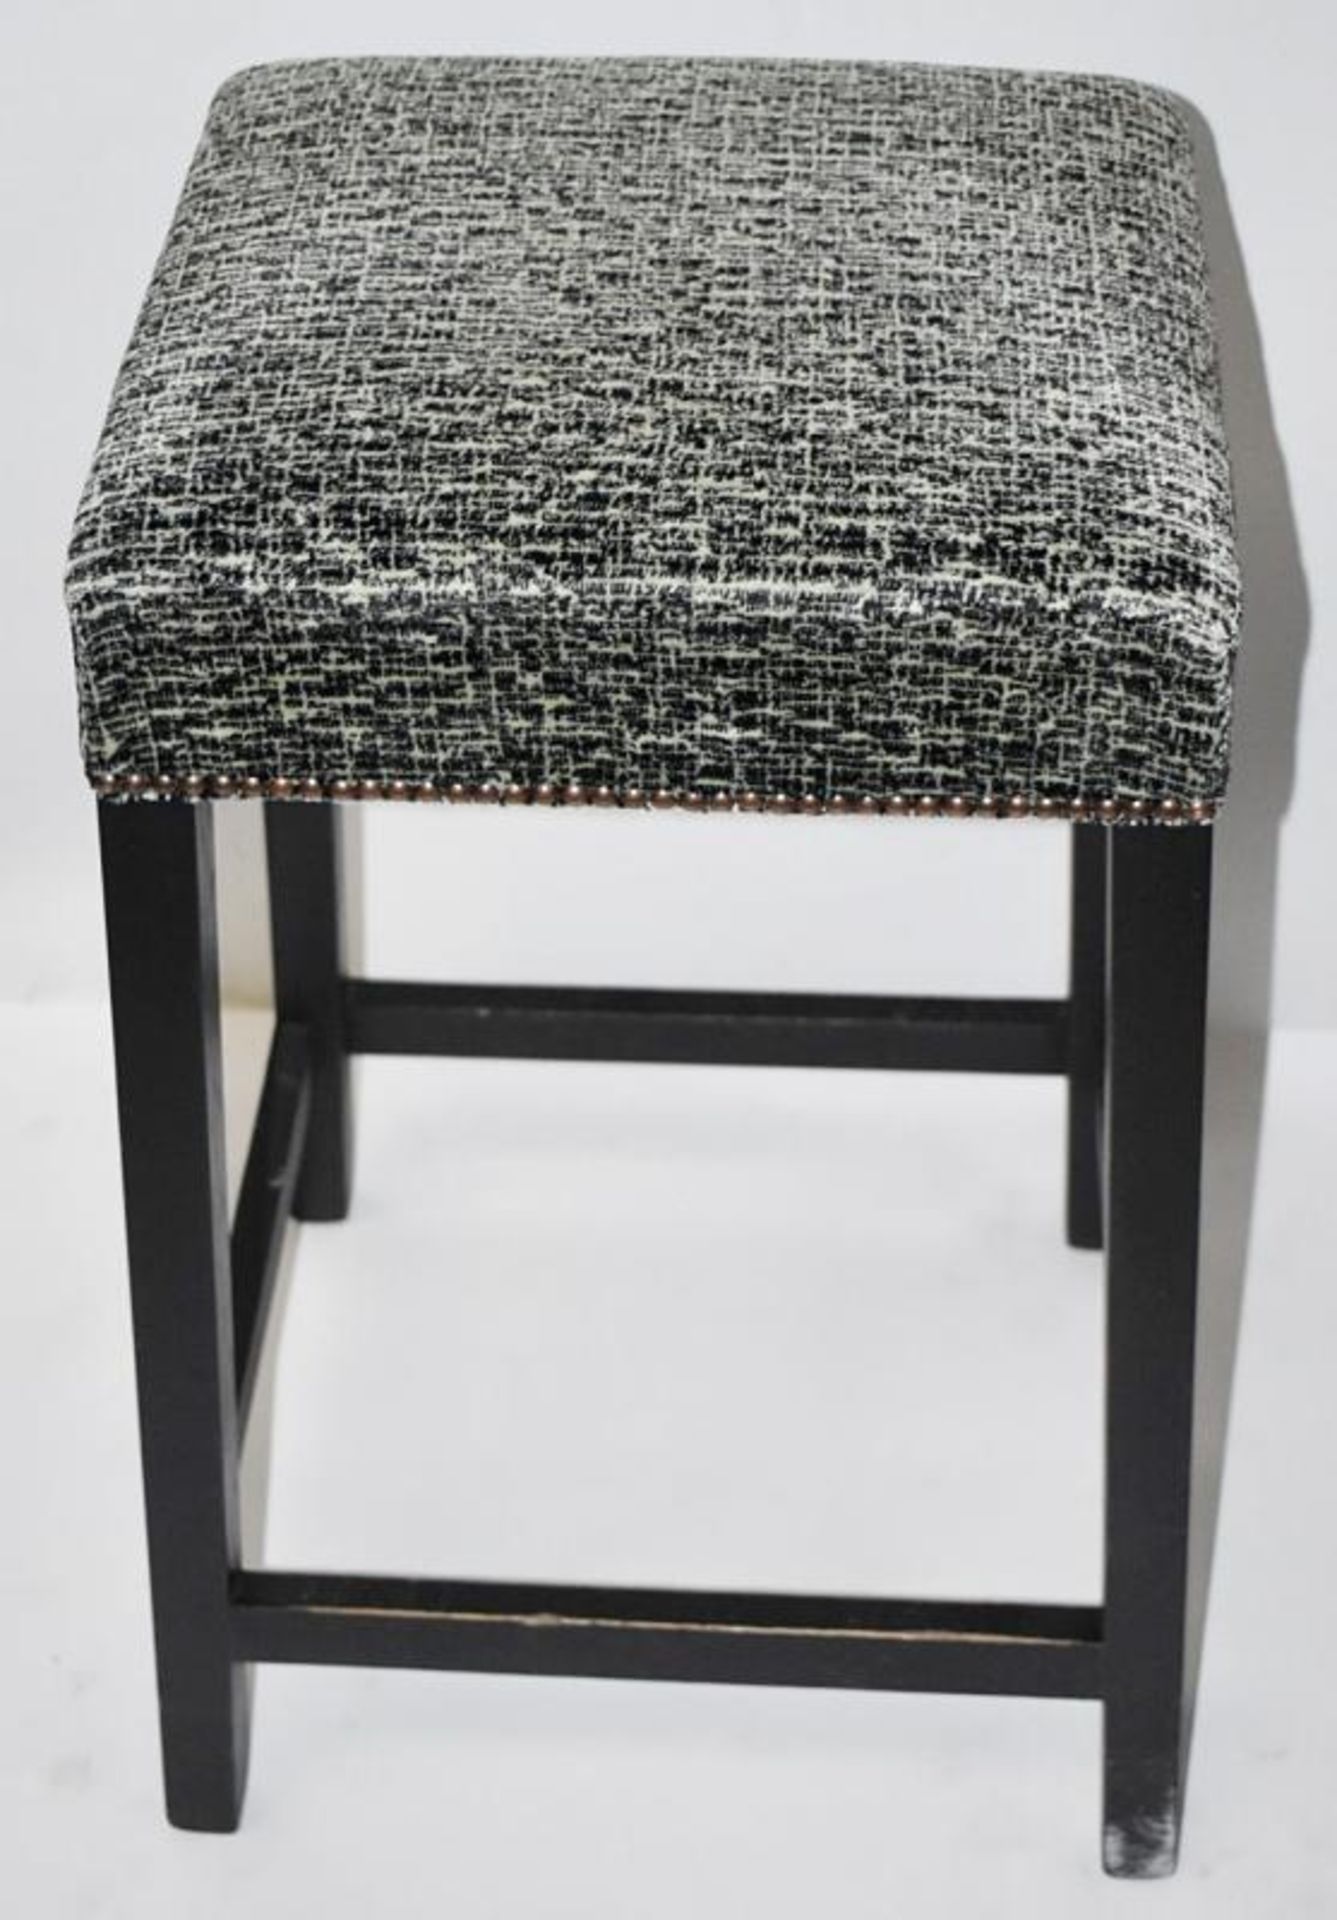 1 x Contemporary Bar Stool Upholstered In A Chic Designer Chenille Fabric - Recently Removed From A - Image 3 of 6